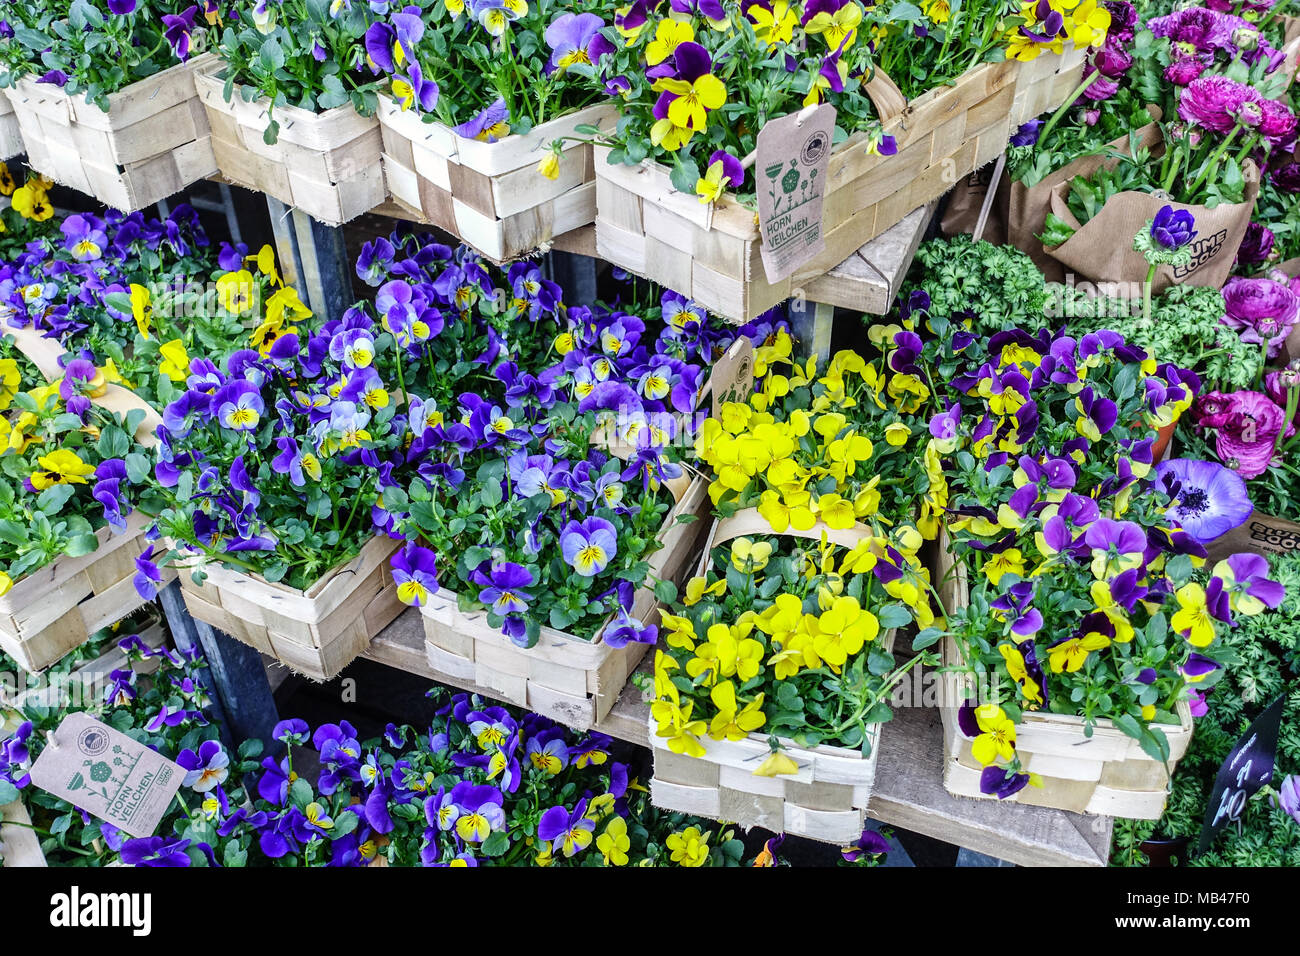 Pansies, Viola tricolor for sale in basket Stock Photo